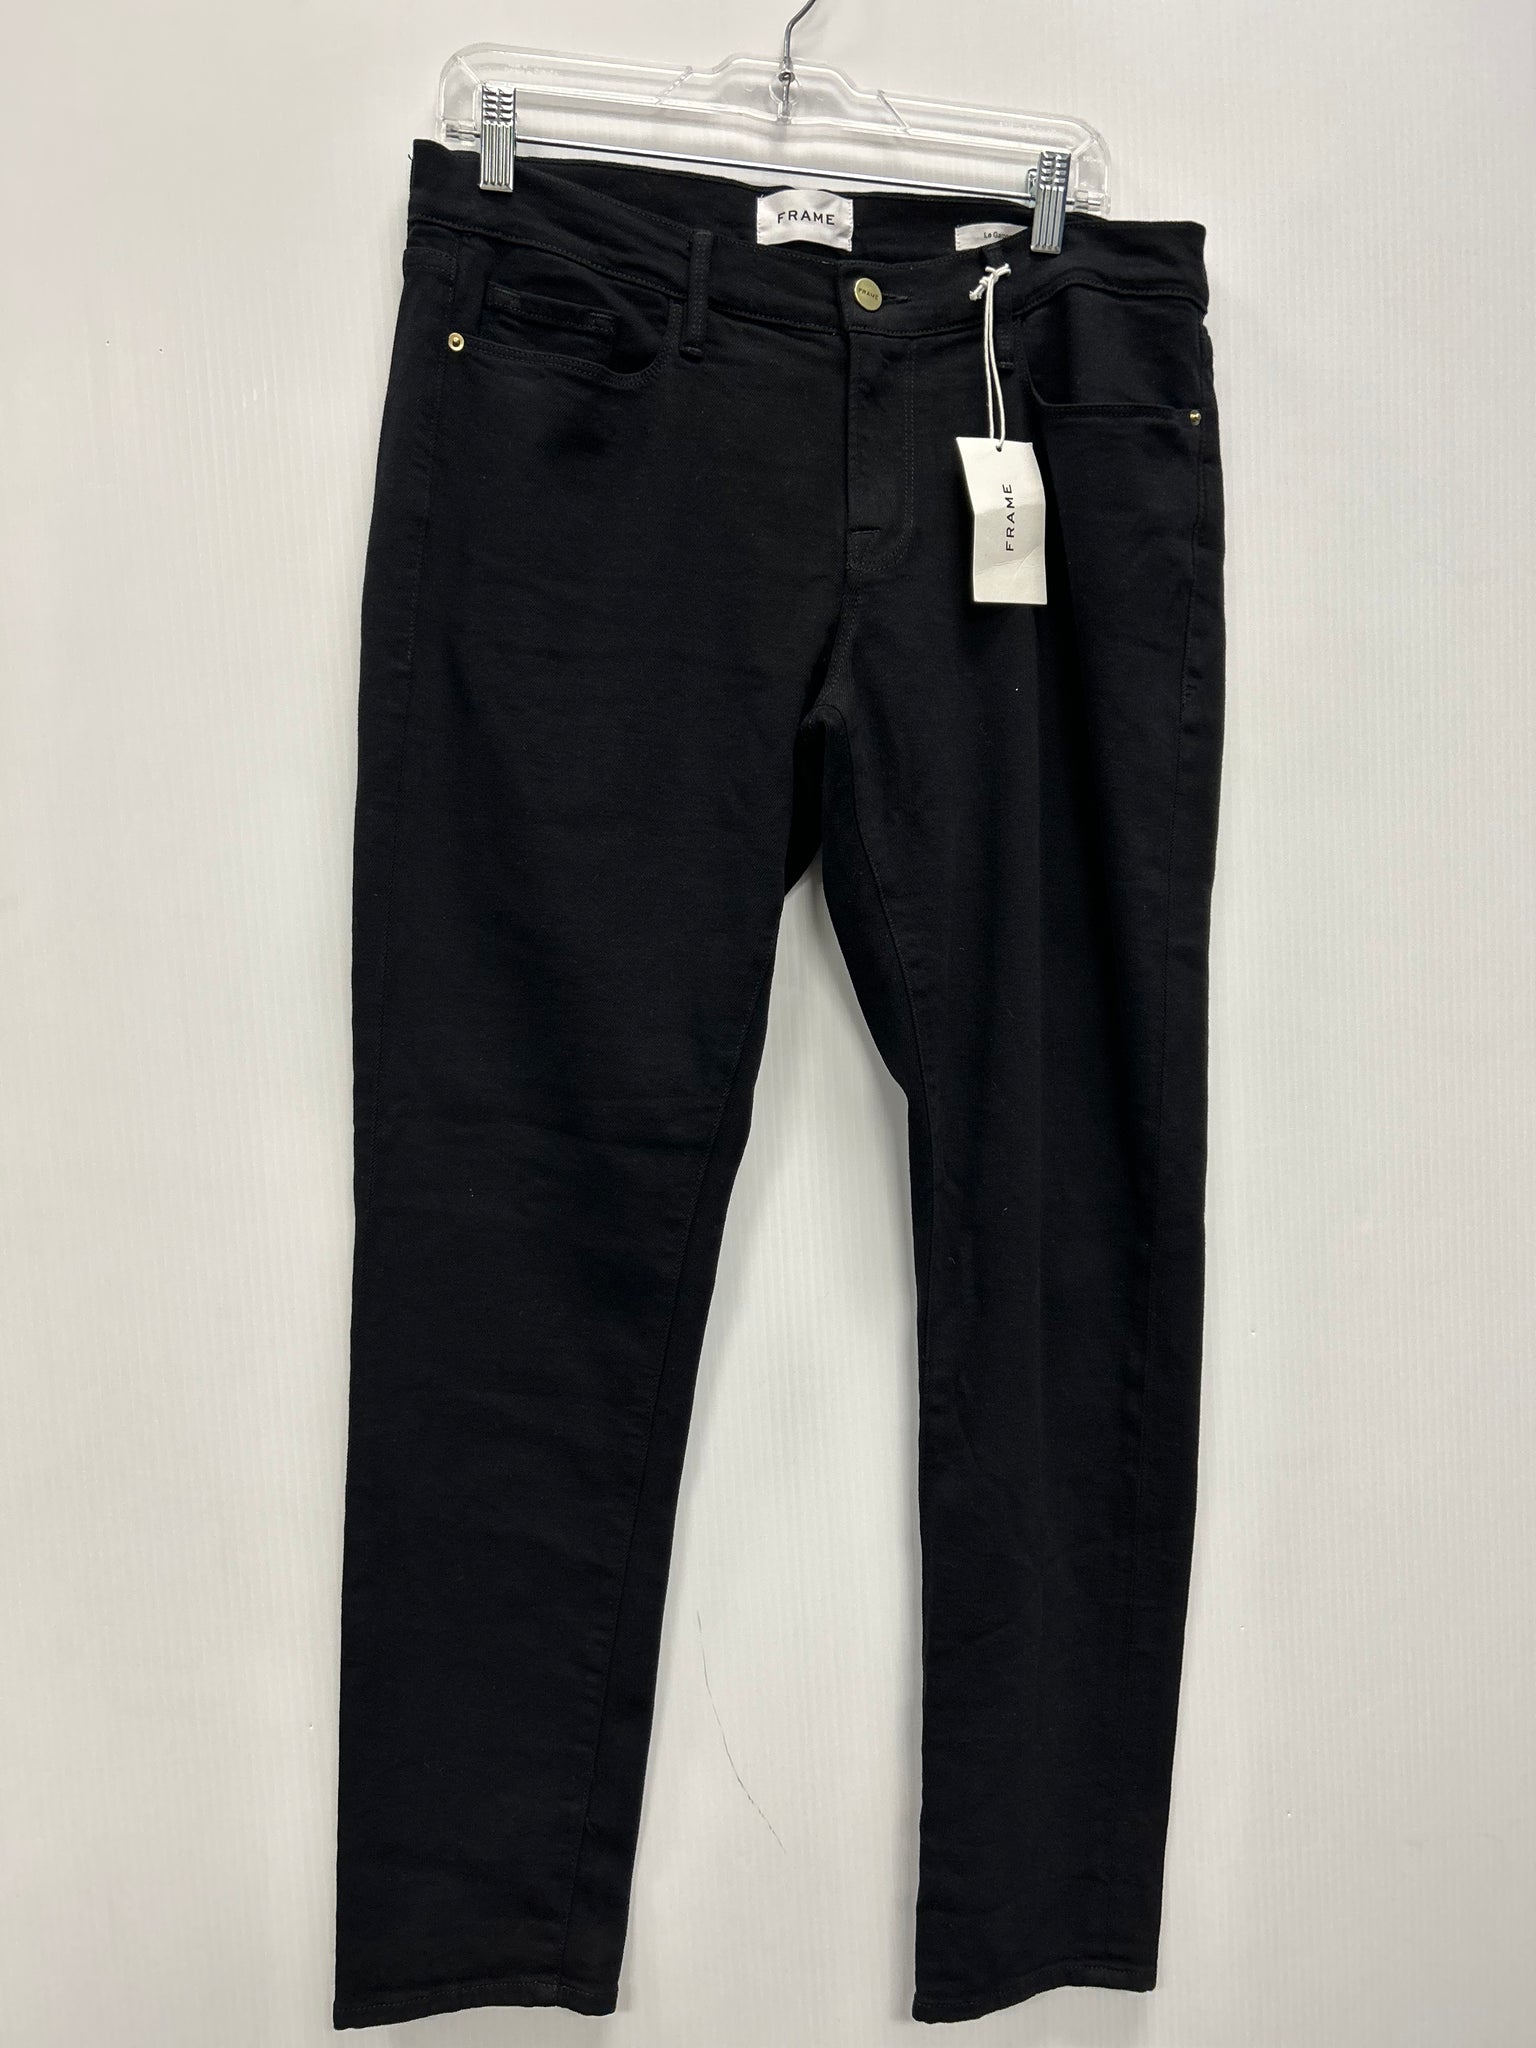 **NEW** Size 29 FRAME Jeans #0072